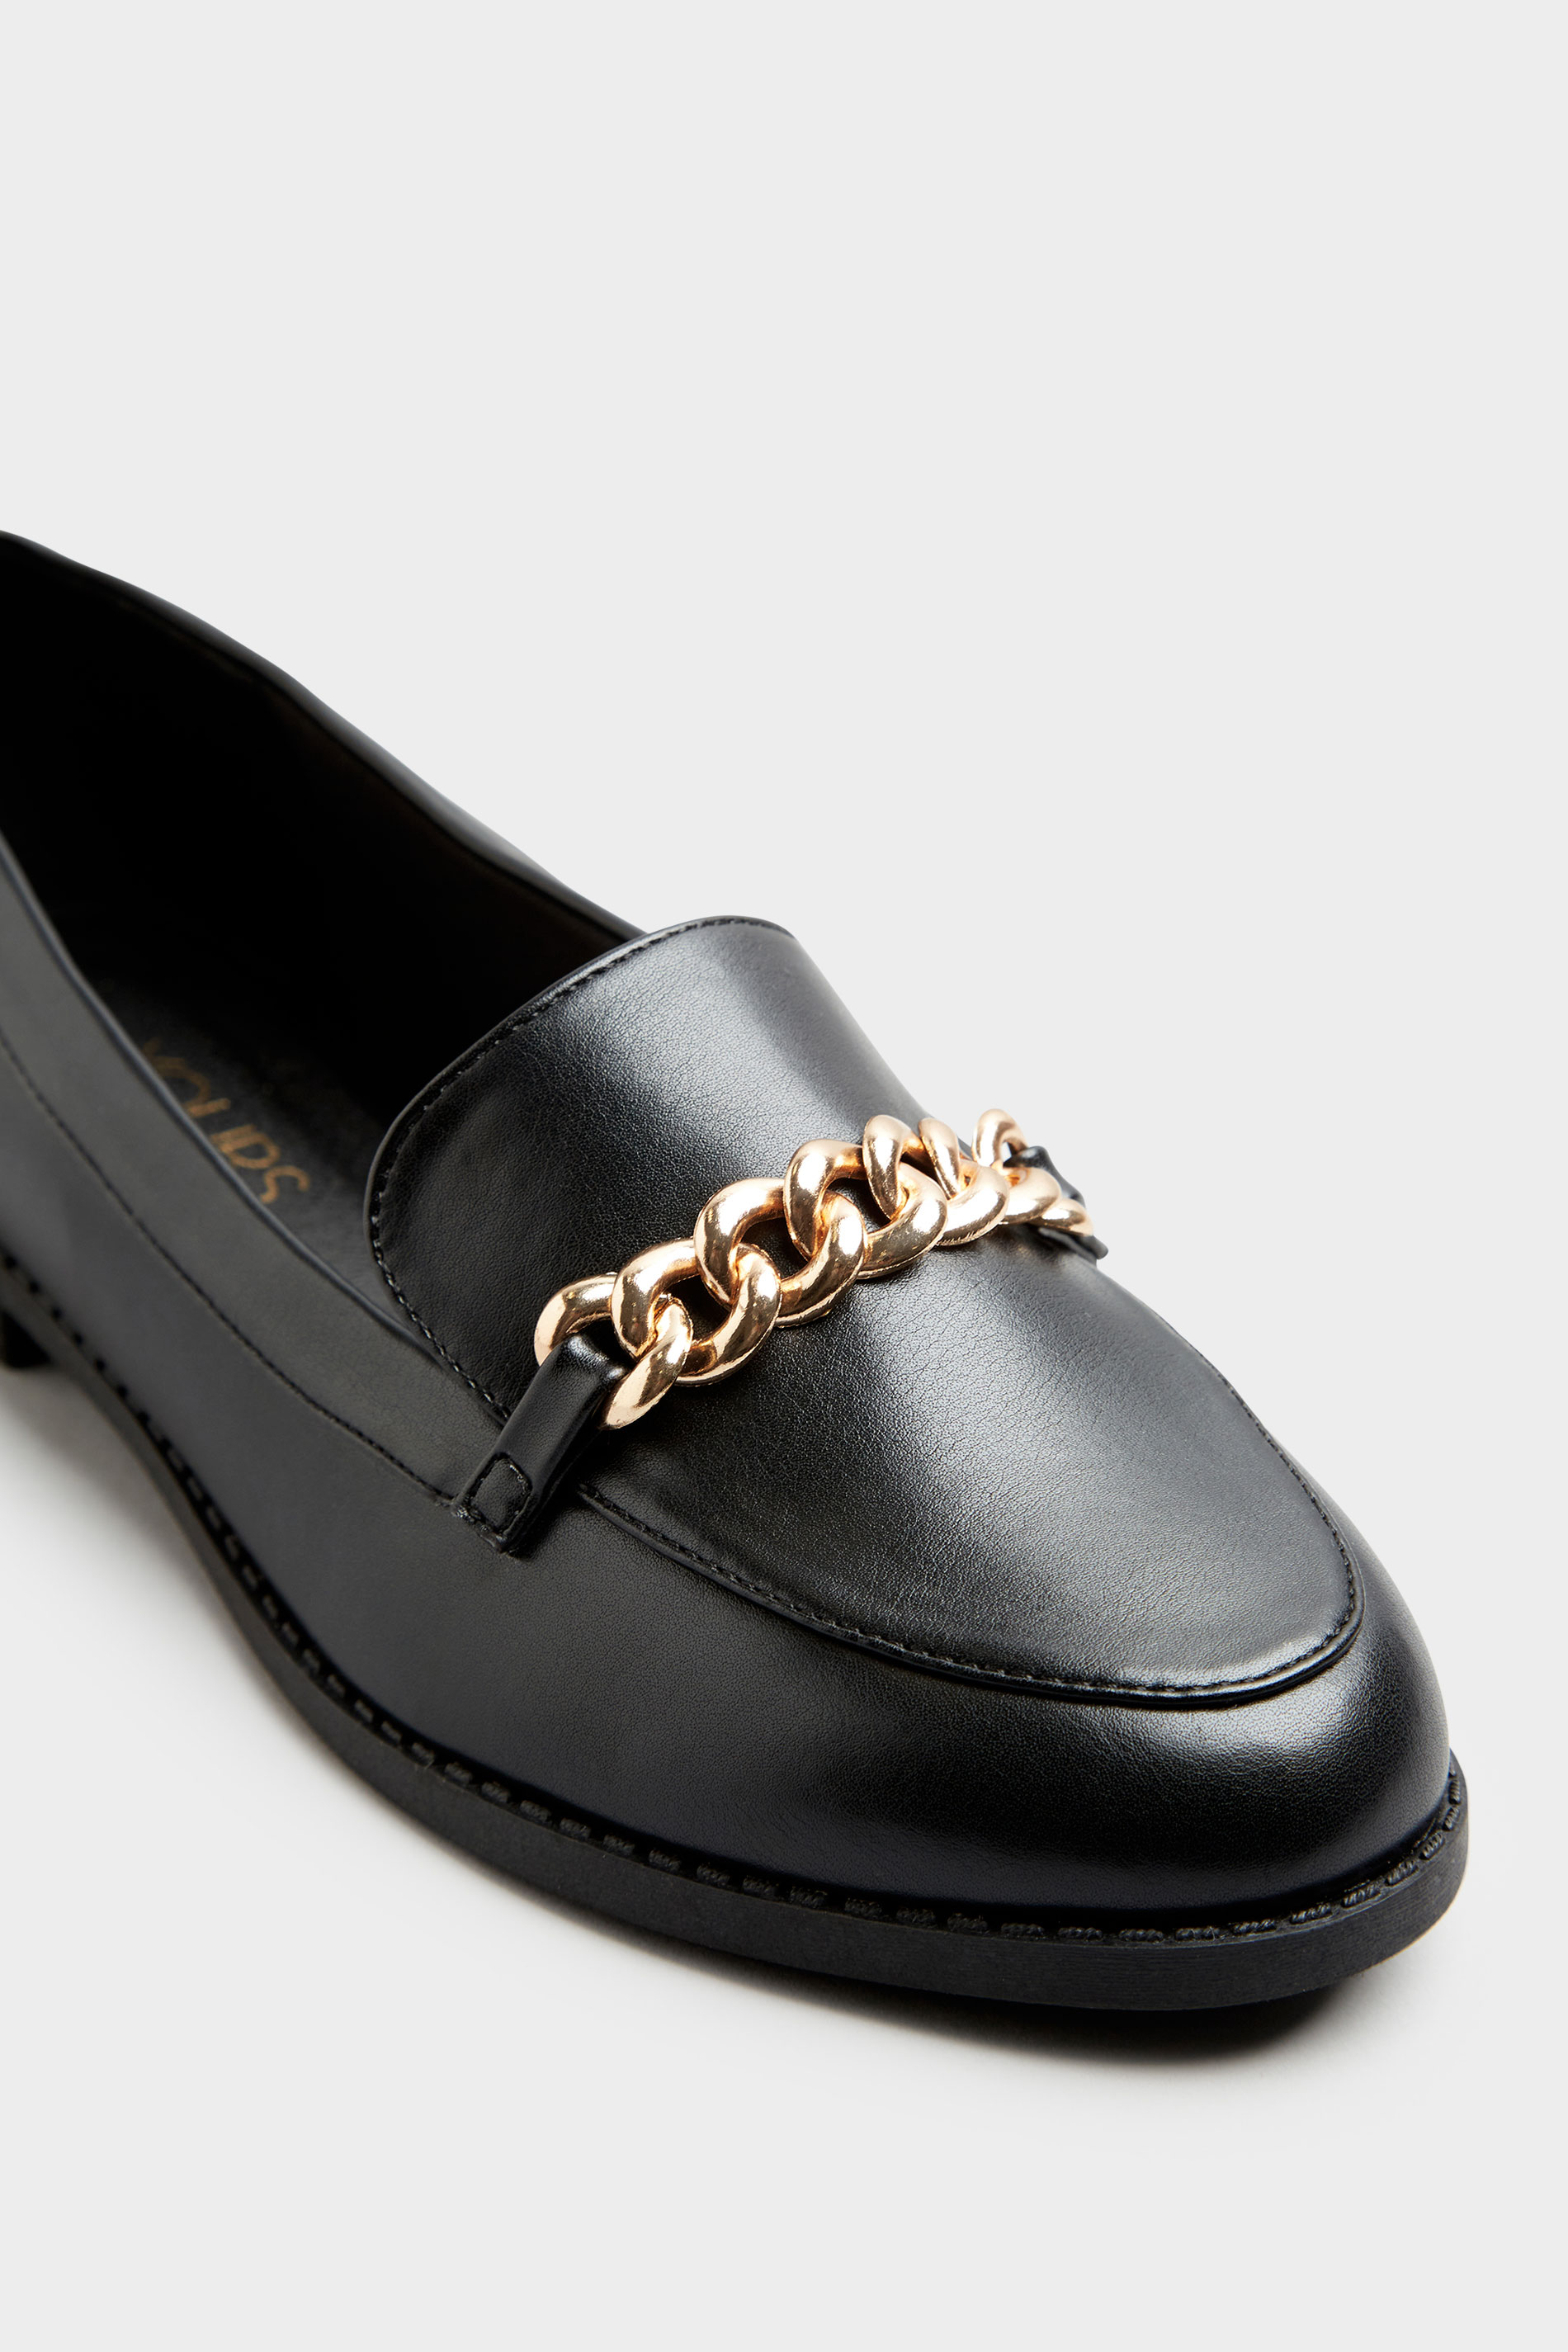 Black Chain Loafers In Extra Wide Fit | Long Tall Sally